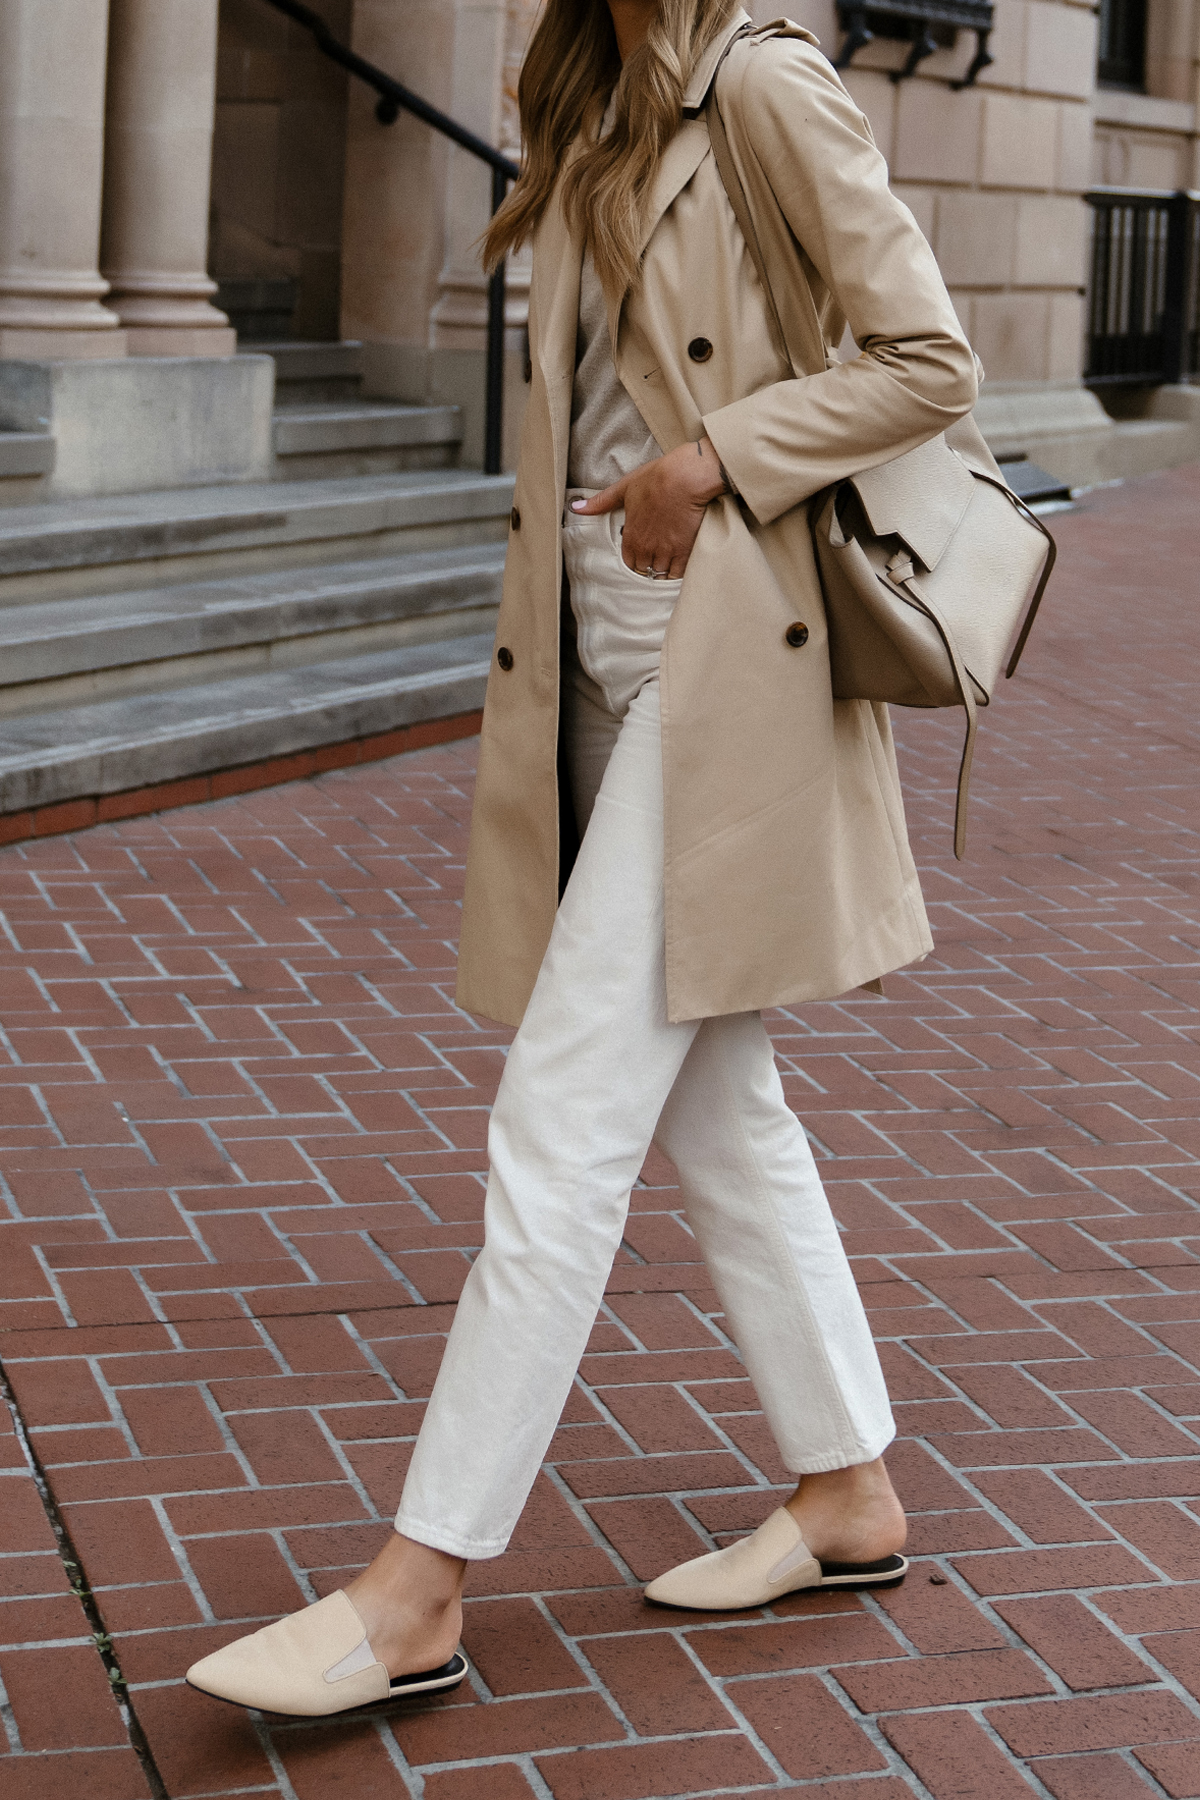 Fashion Jackson Wearing Jcrew Trench Coat White Jeans Outfit Trench Coat Street Style Flat Mules Outfit 1